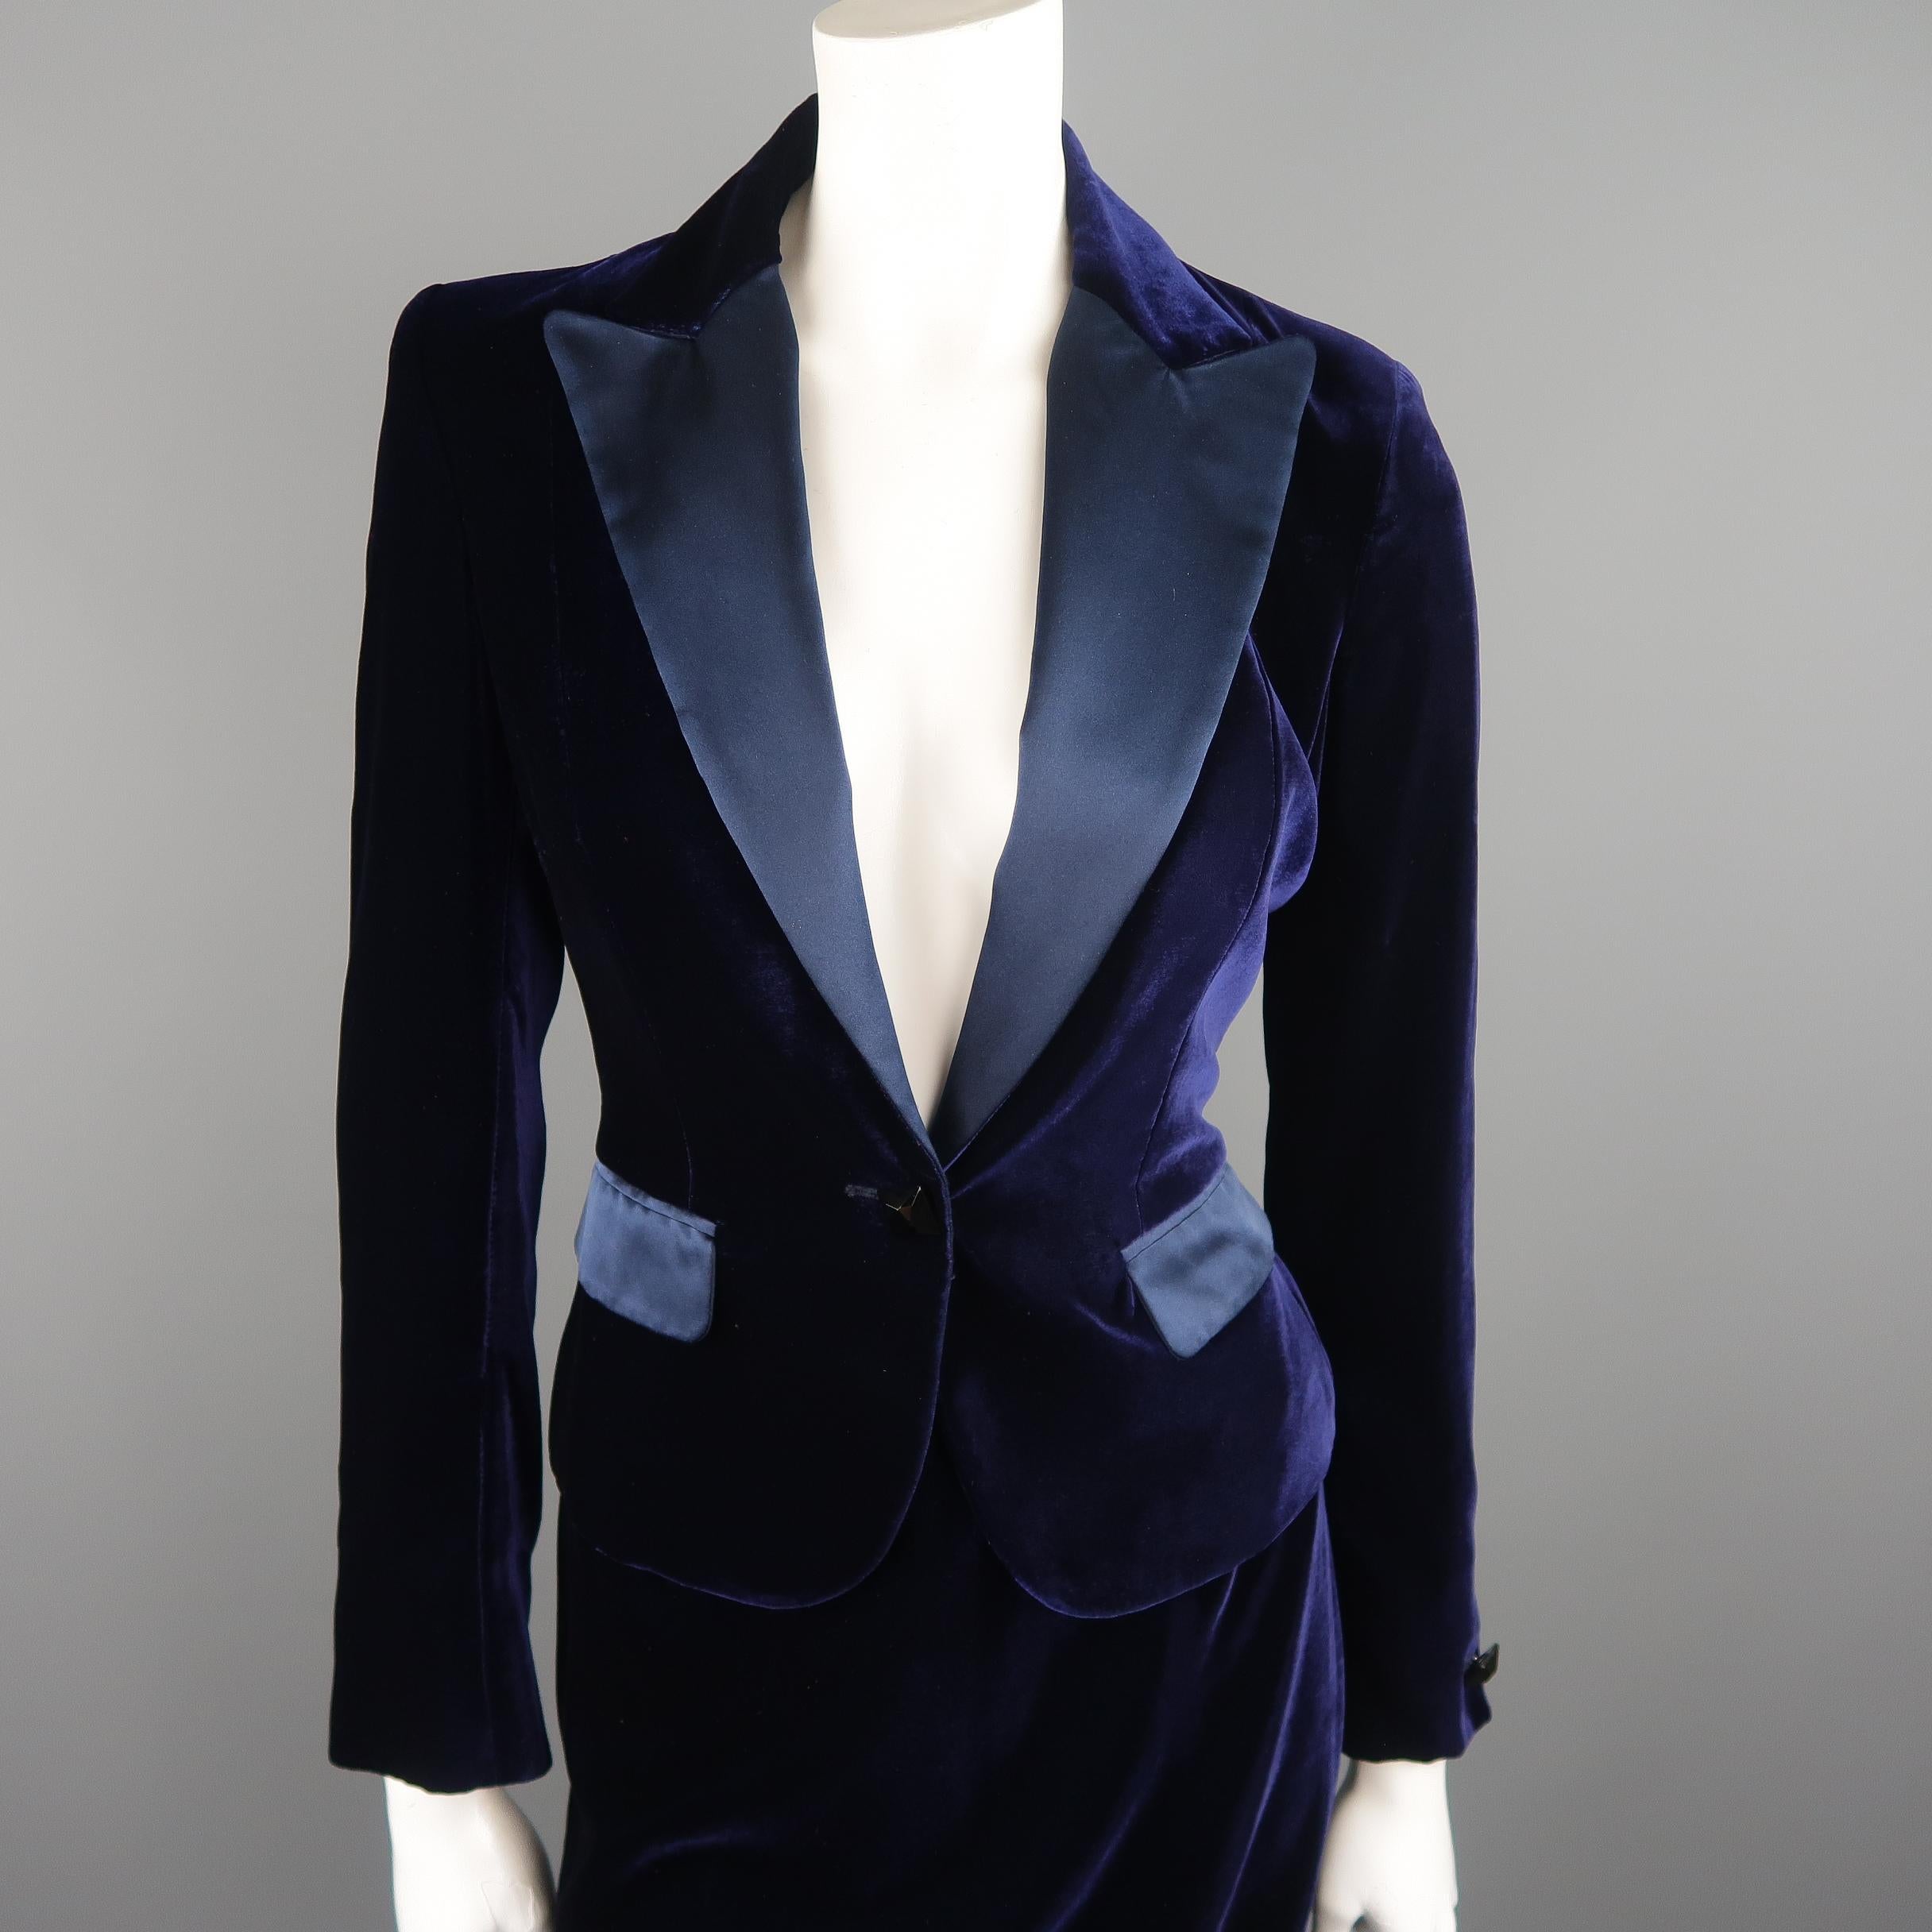 LES COPAINS skirt suit comes in navy blue velvet and includes a cropped, single breasted blazer with a satin lapel, button cuffs, and flap pockets with a matching satin waistband pencil skirt. Made in Italy.
 
Excellent Pre-Owned Condition.
Marked: